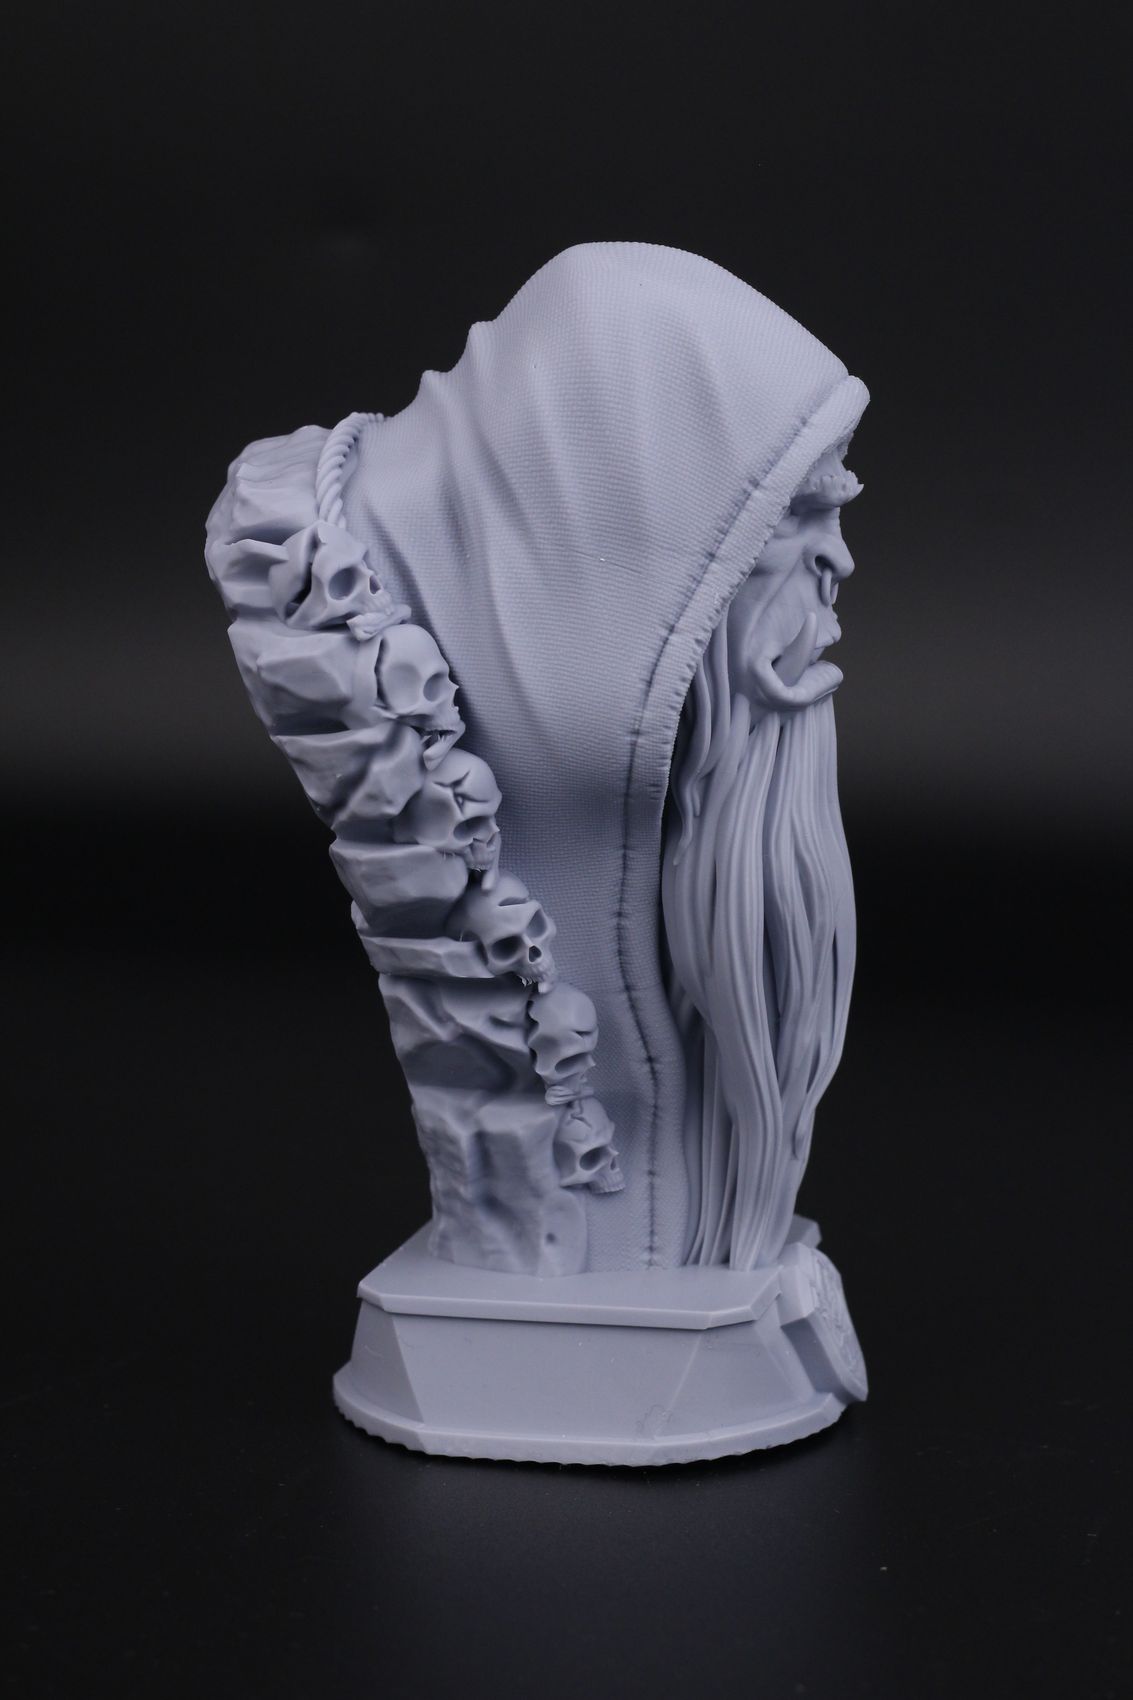 GulDan Bust from Fotis Mint Anycubic Photon D2 Review2 | Anycubic Photon D2 Review: DLP Resin 3D Printer